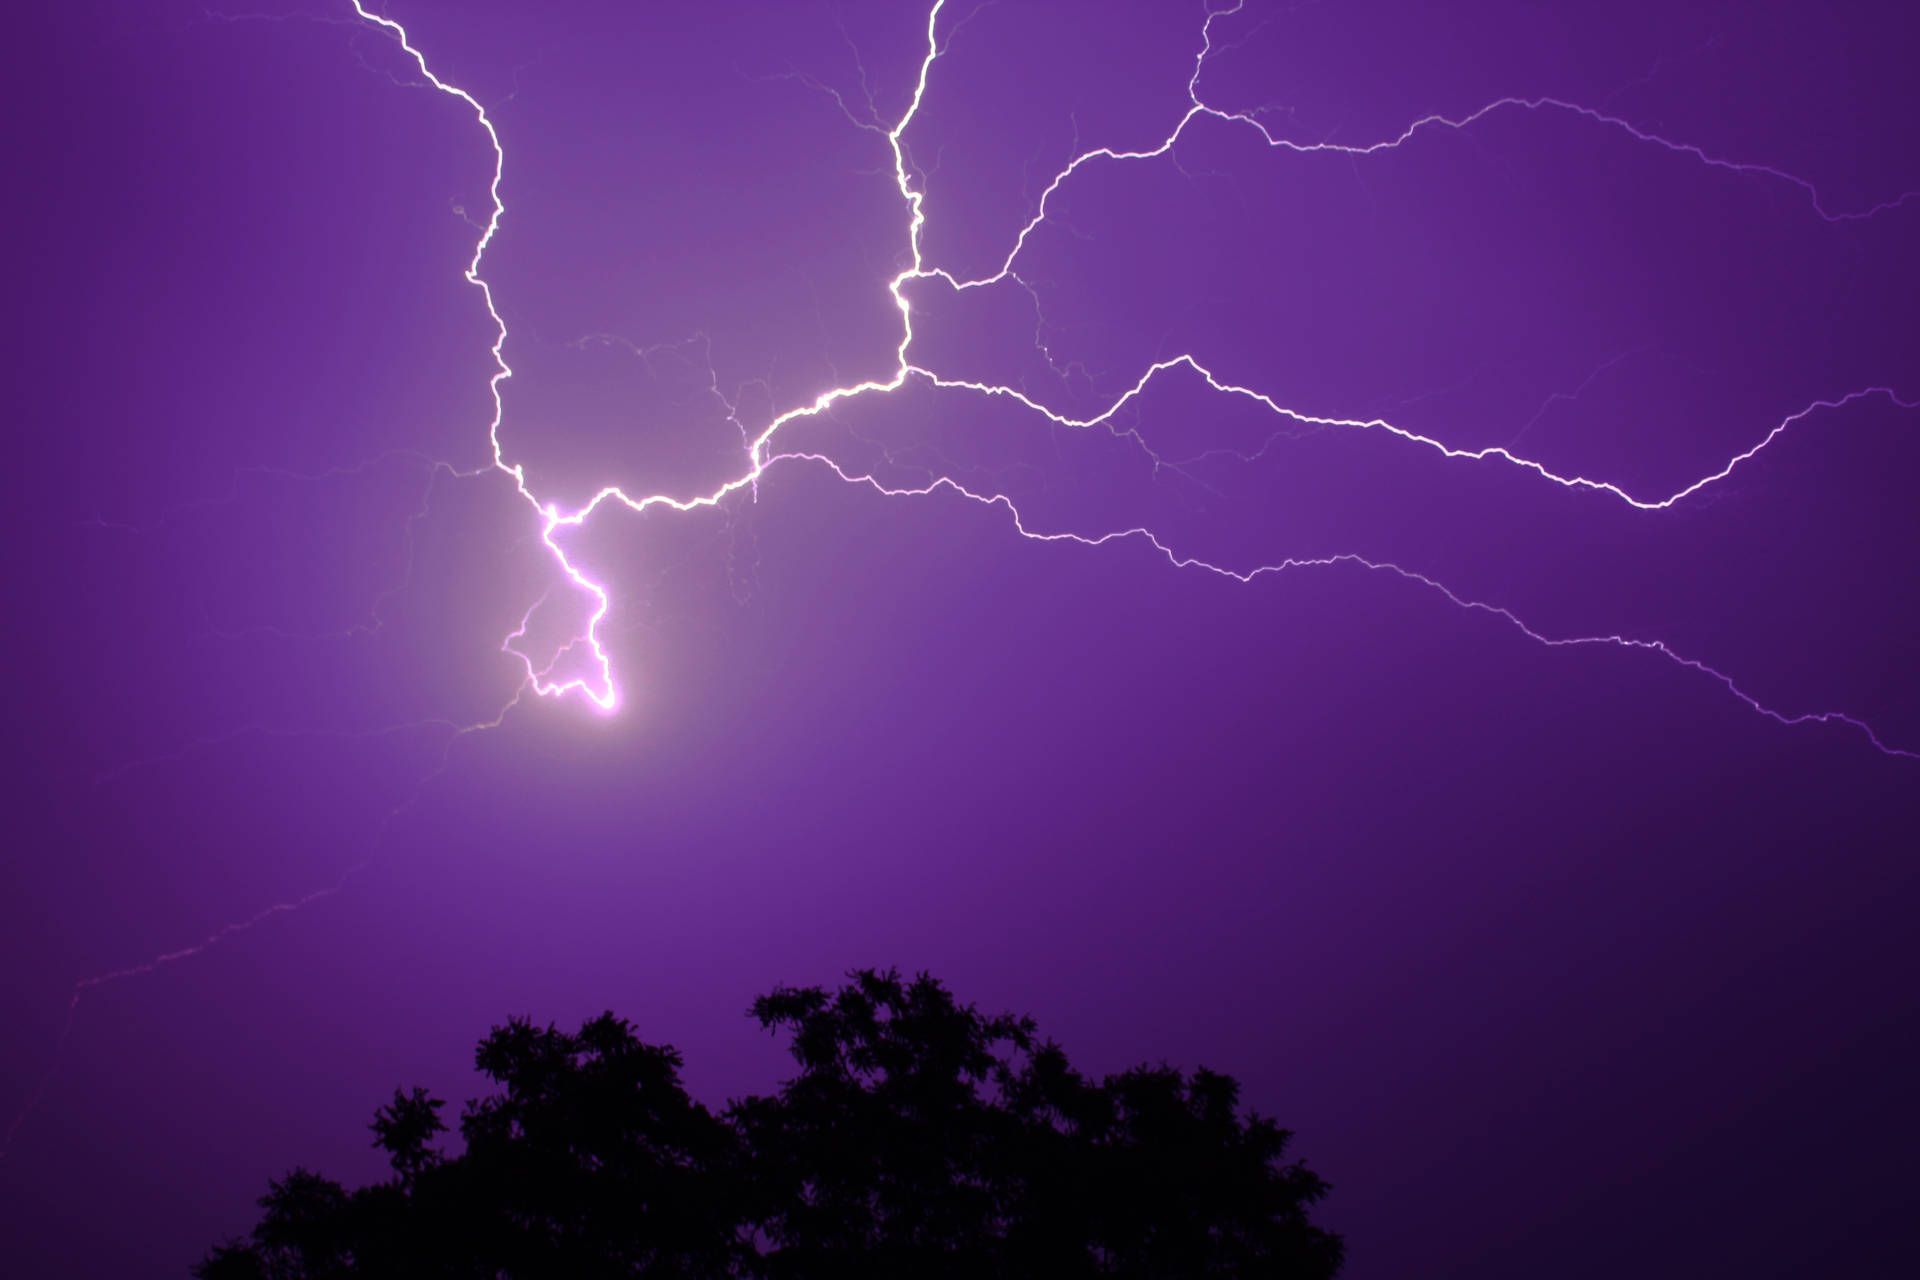 A purple sky with lightning and trees - Lightning